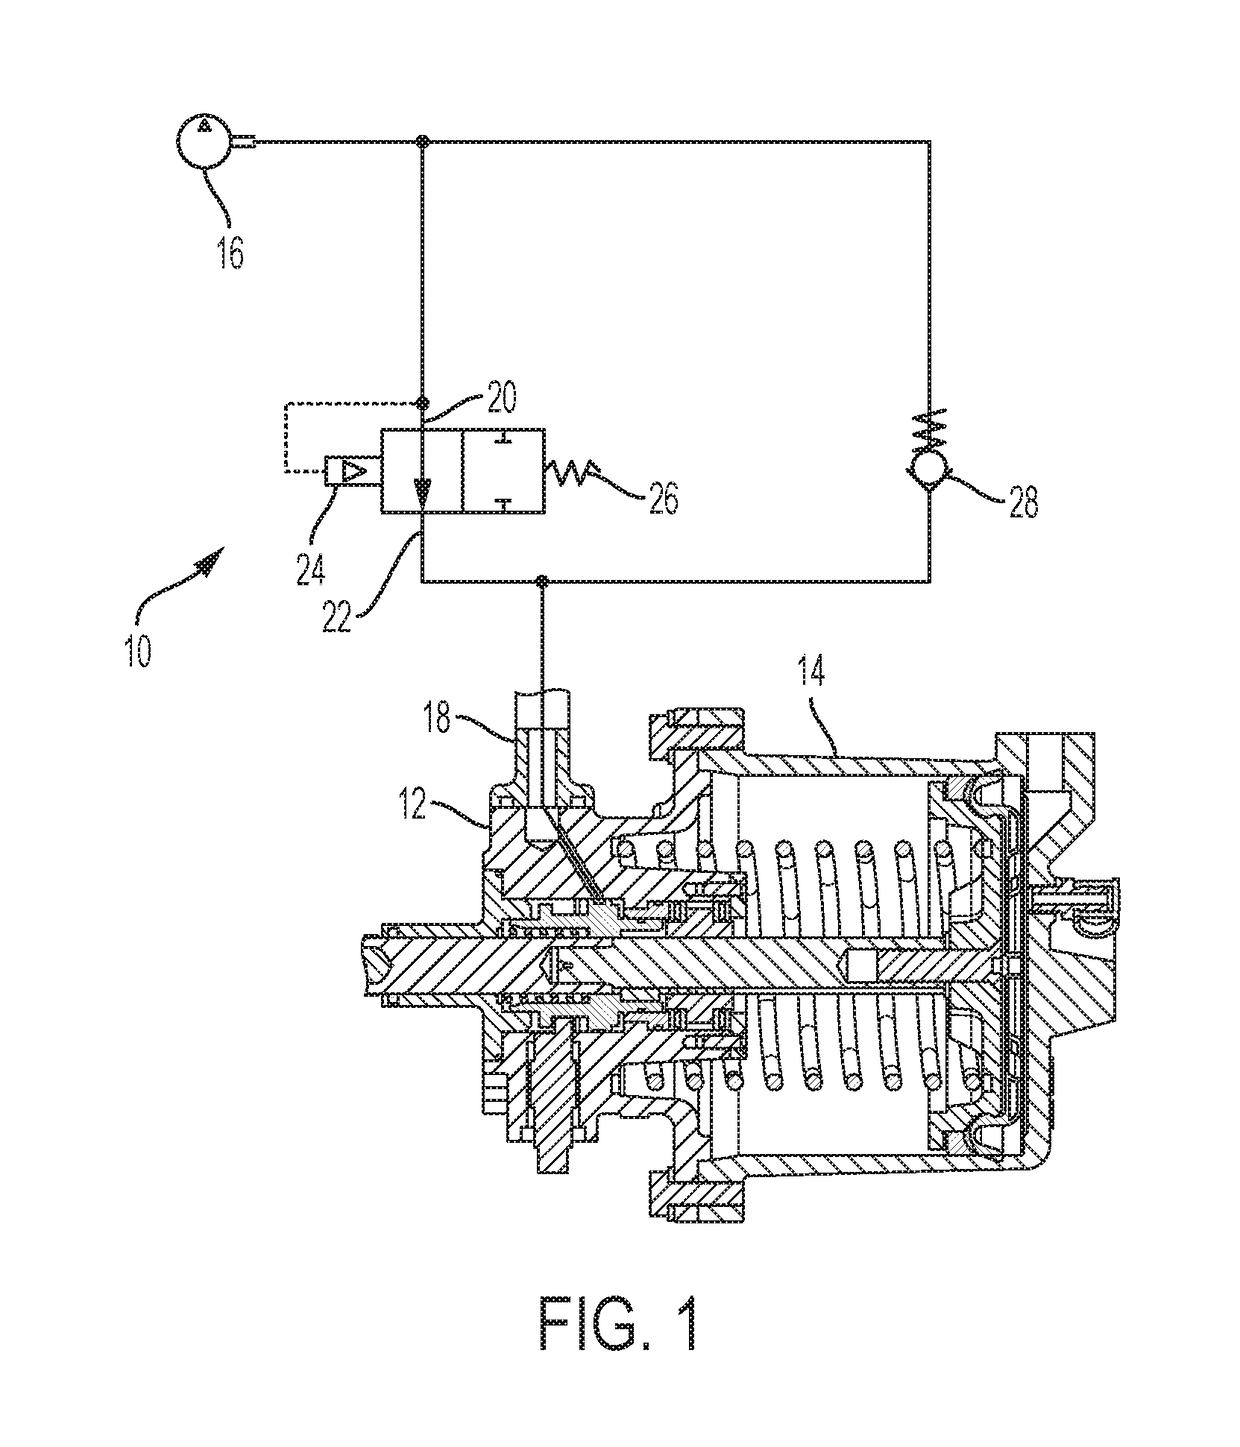 Control system for automatic parking brake of rail vehicle